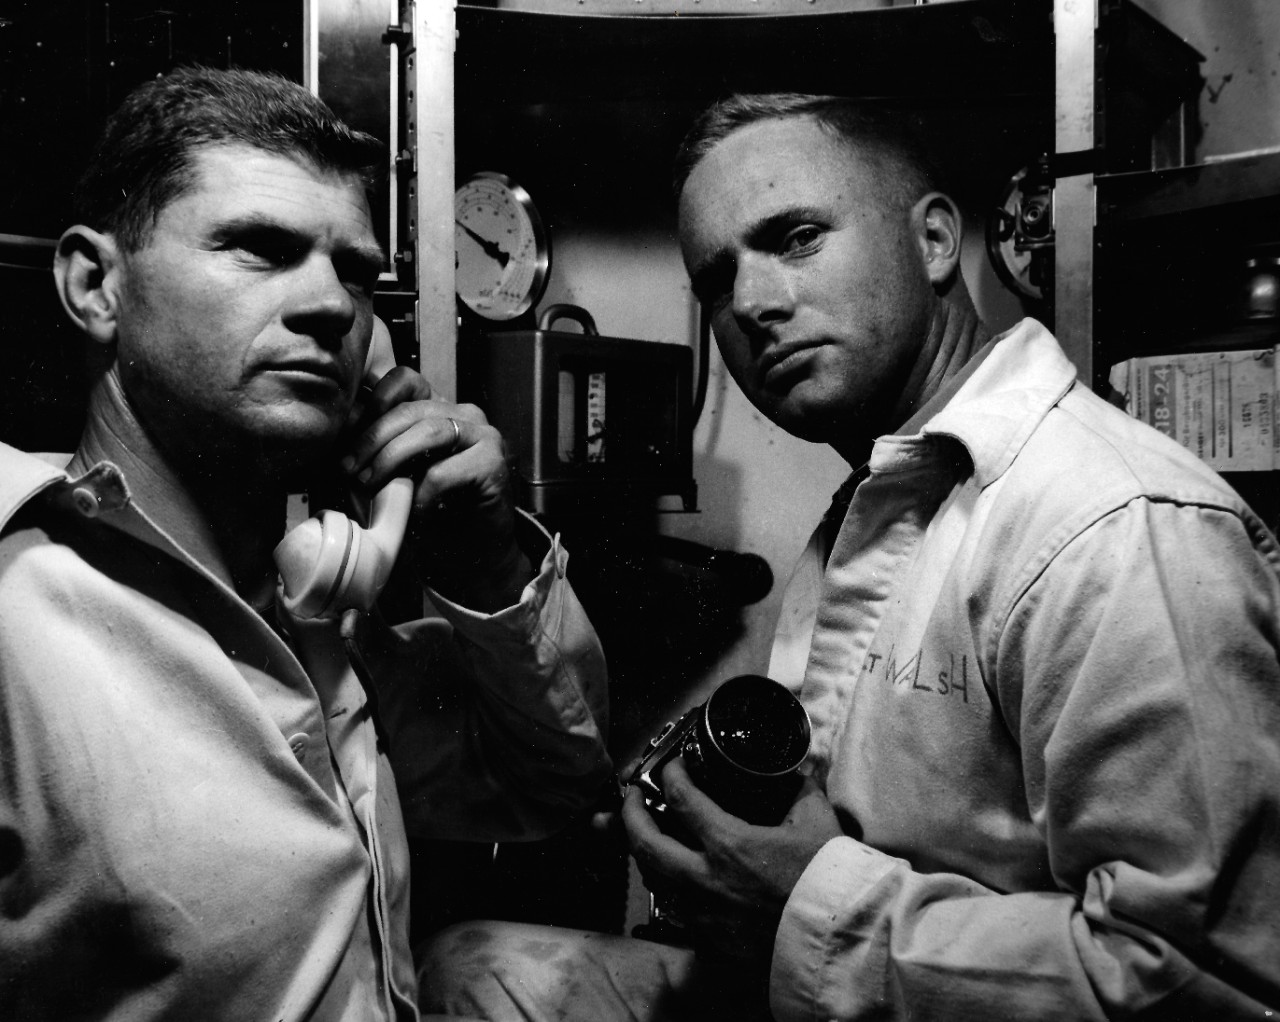 NMUSN-4638:   Bathyscaph Trieste, 1960.   Lieutenant Don Walsh, right, and Dr. A.B. Rechnitzer, possibly during testing by the Naval Electronics Laboratory in San Diego, California.    National Museum of the U.S. Navy Photograph Collection.